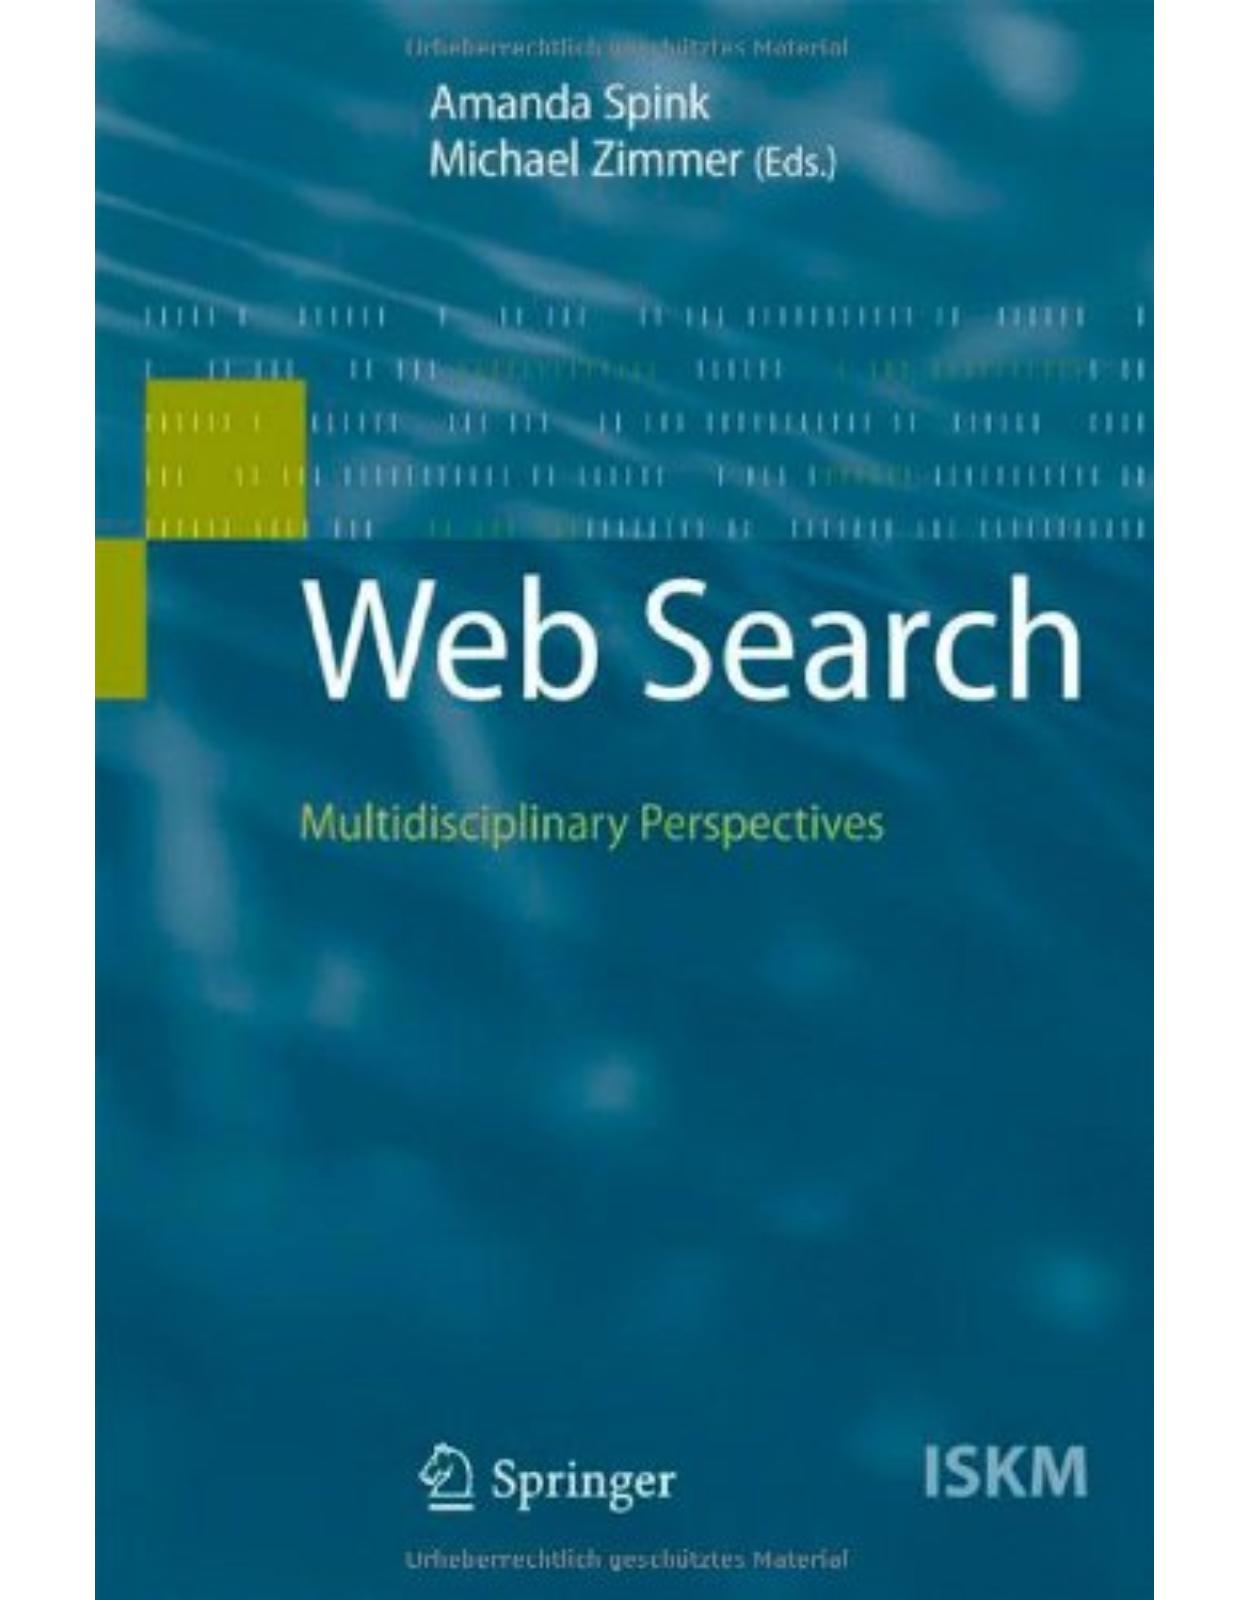 Web Search: Multidisciplinary Perspectives (Information Science and Knowledge Management)